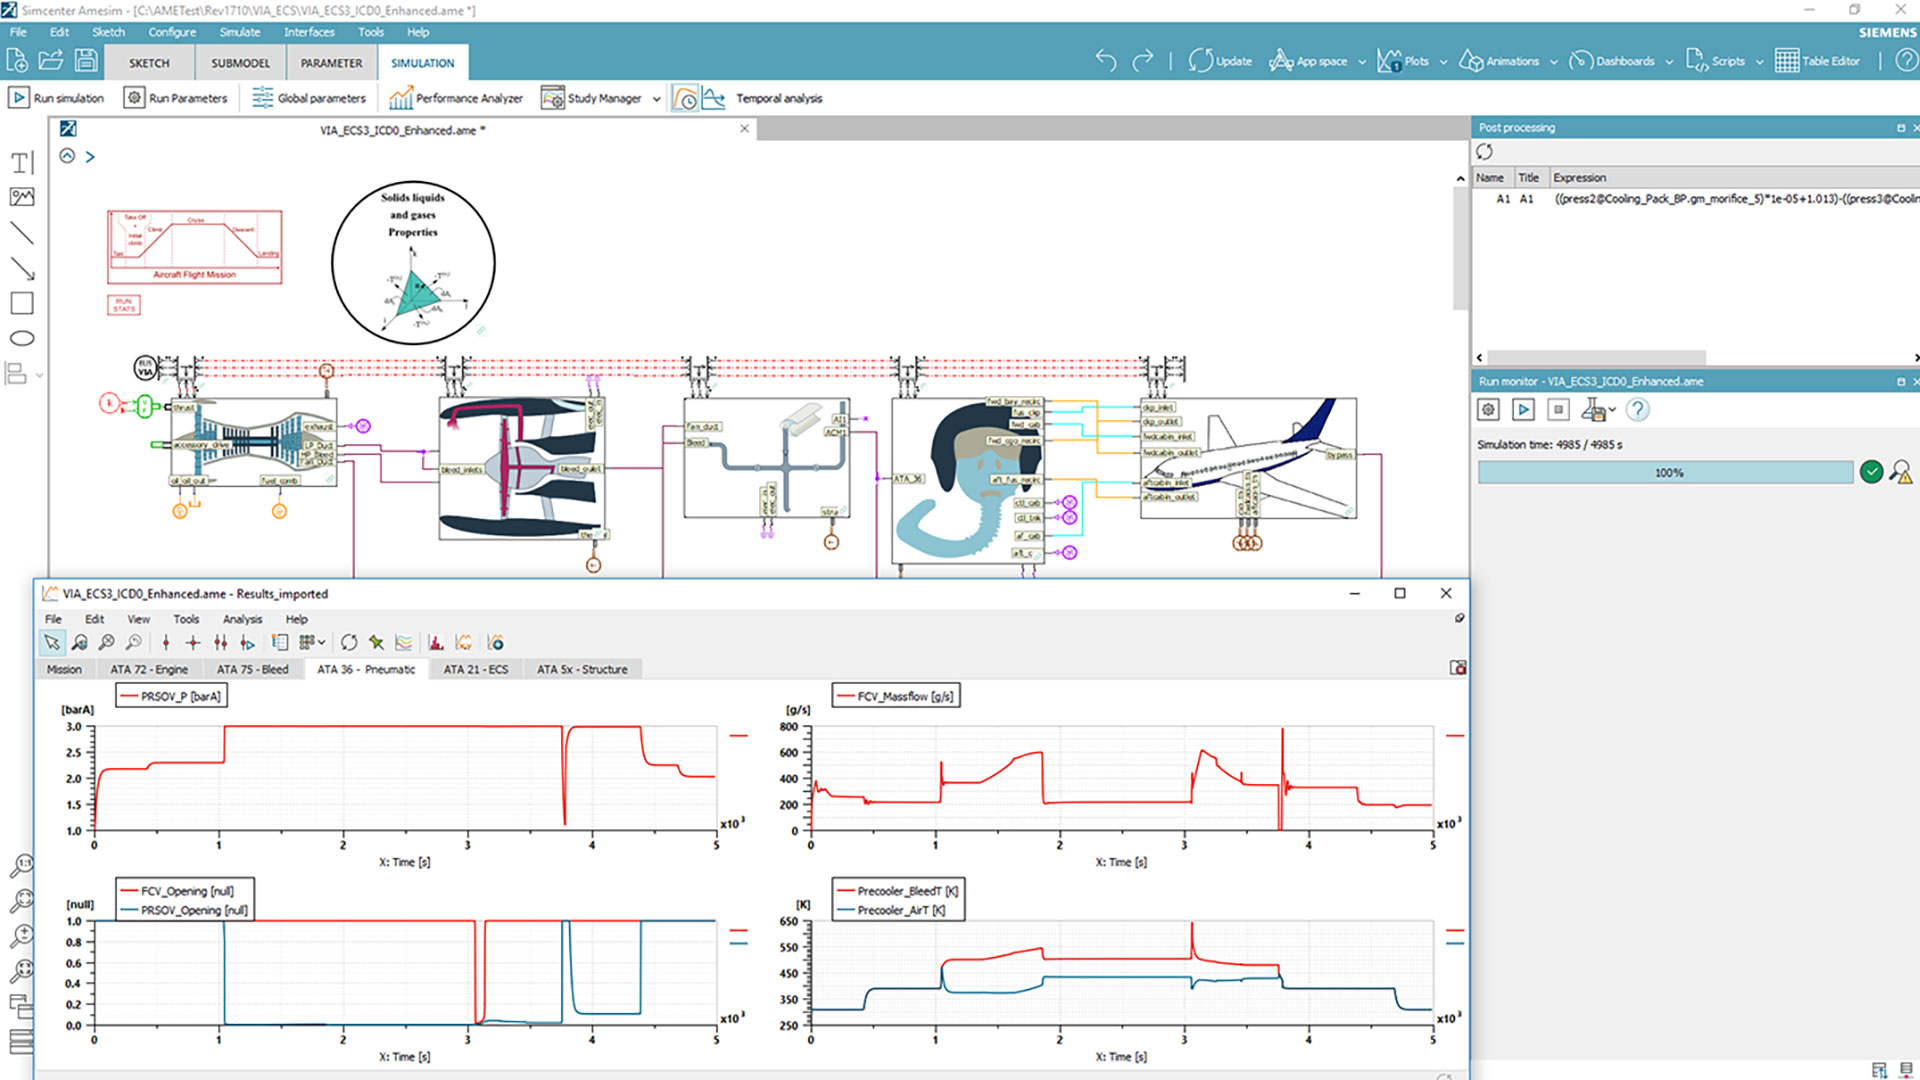 Simcenter Amesim for the environmental control systems optimization